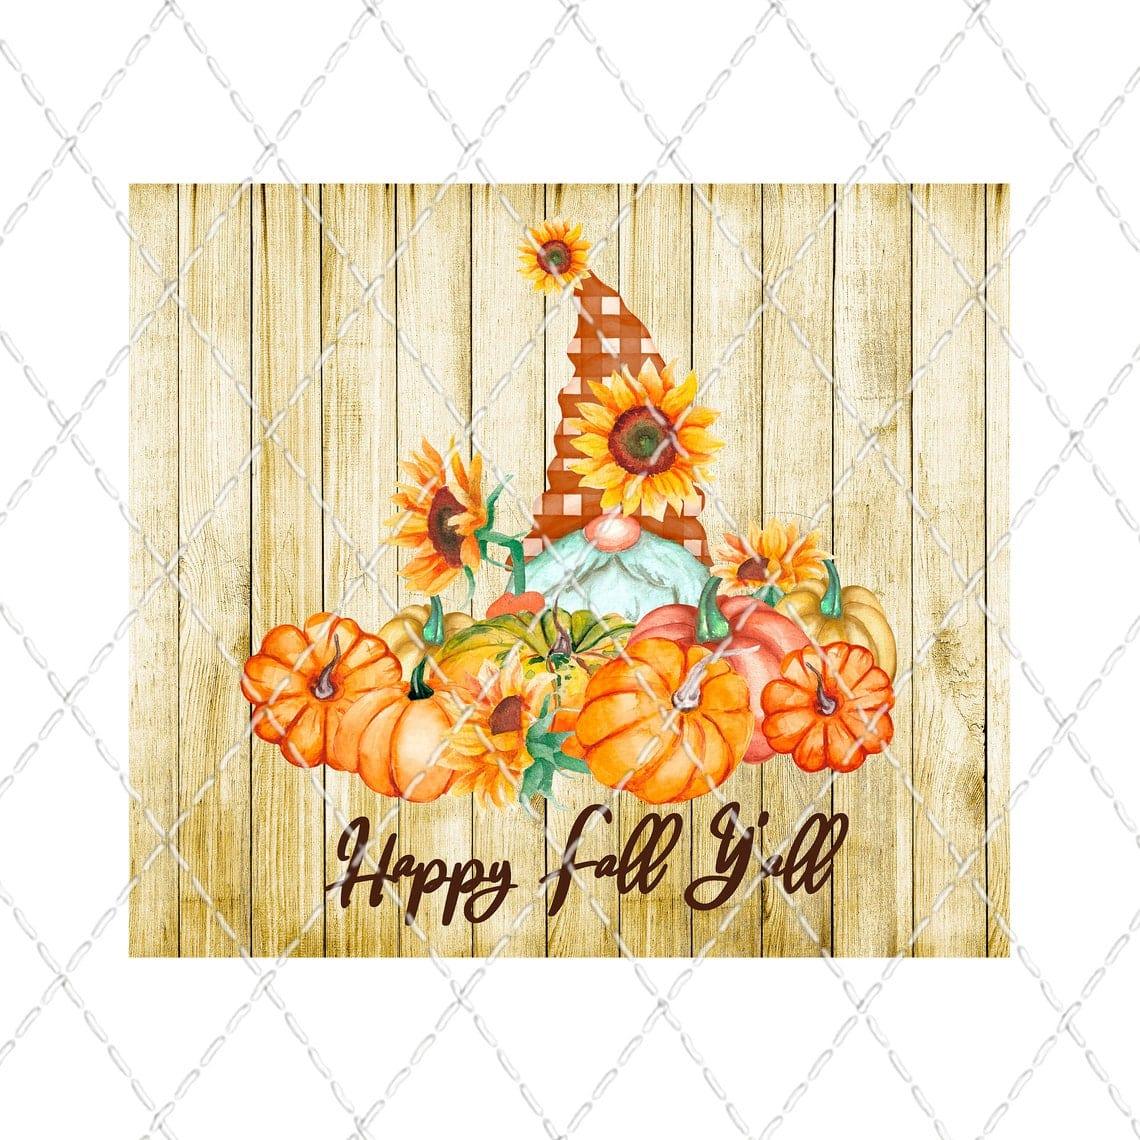 Happy Fall Y'all Gnome 30 oz. Straight Skinny Tumbler by SSC Designs - Scrapbook Supply Companies